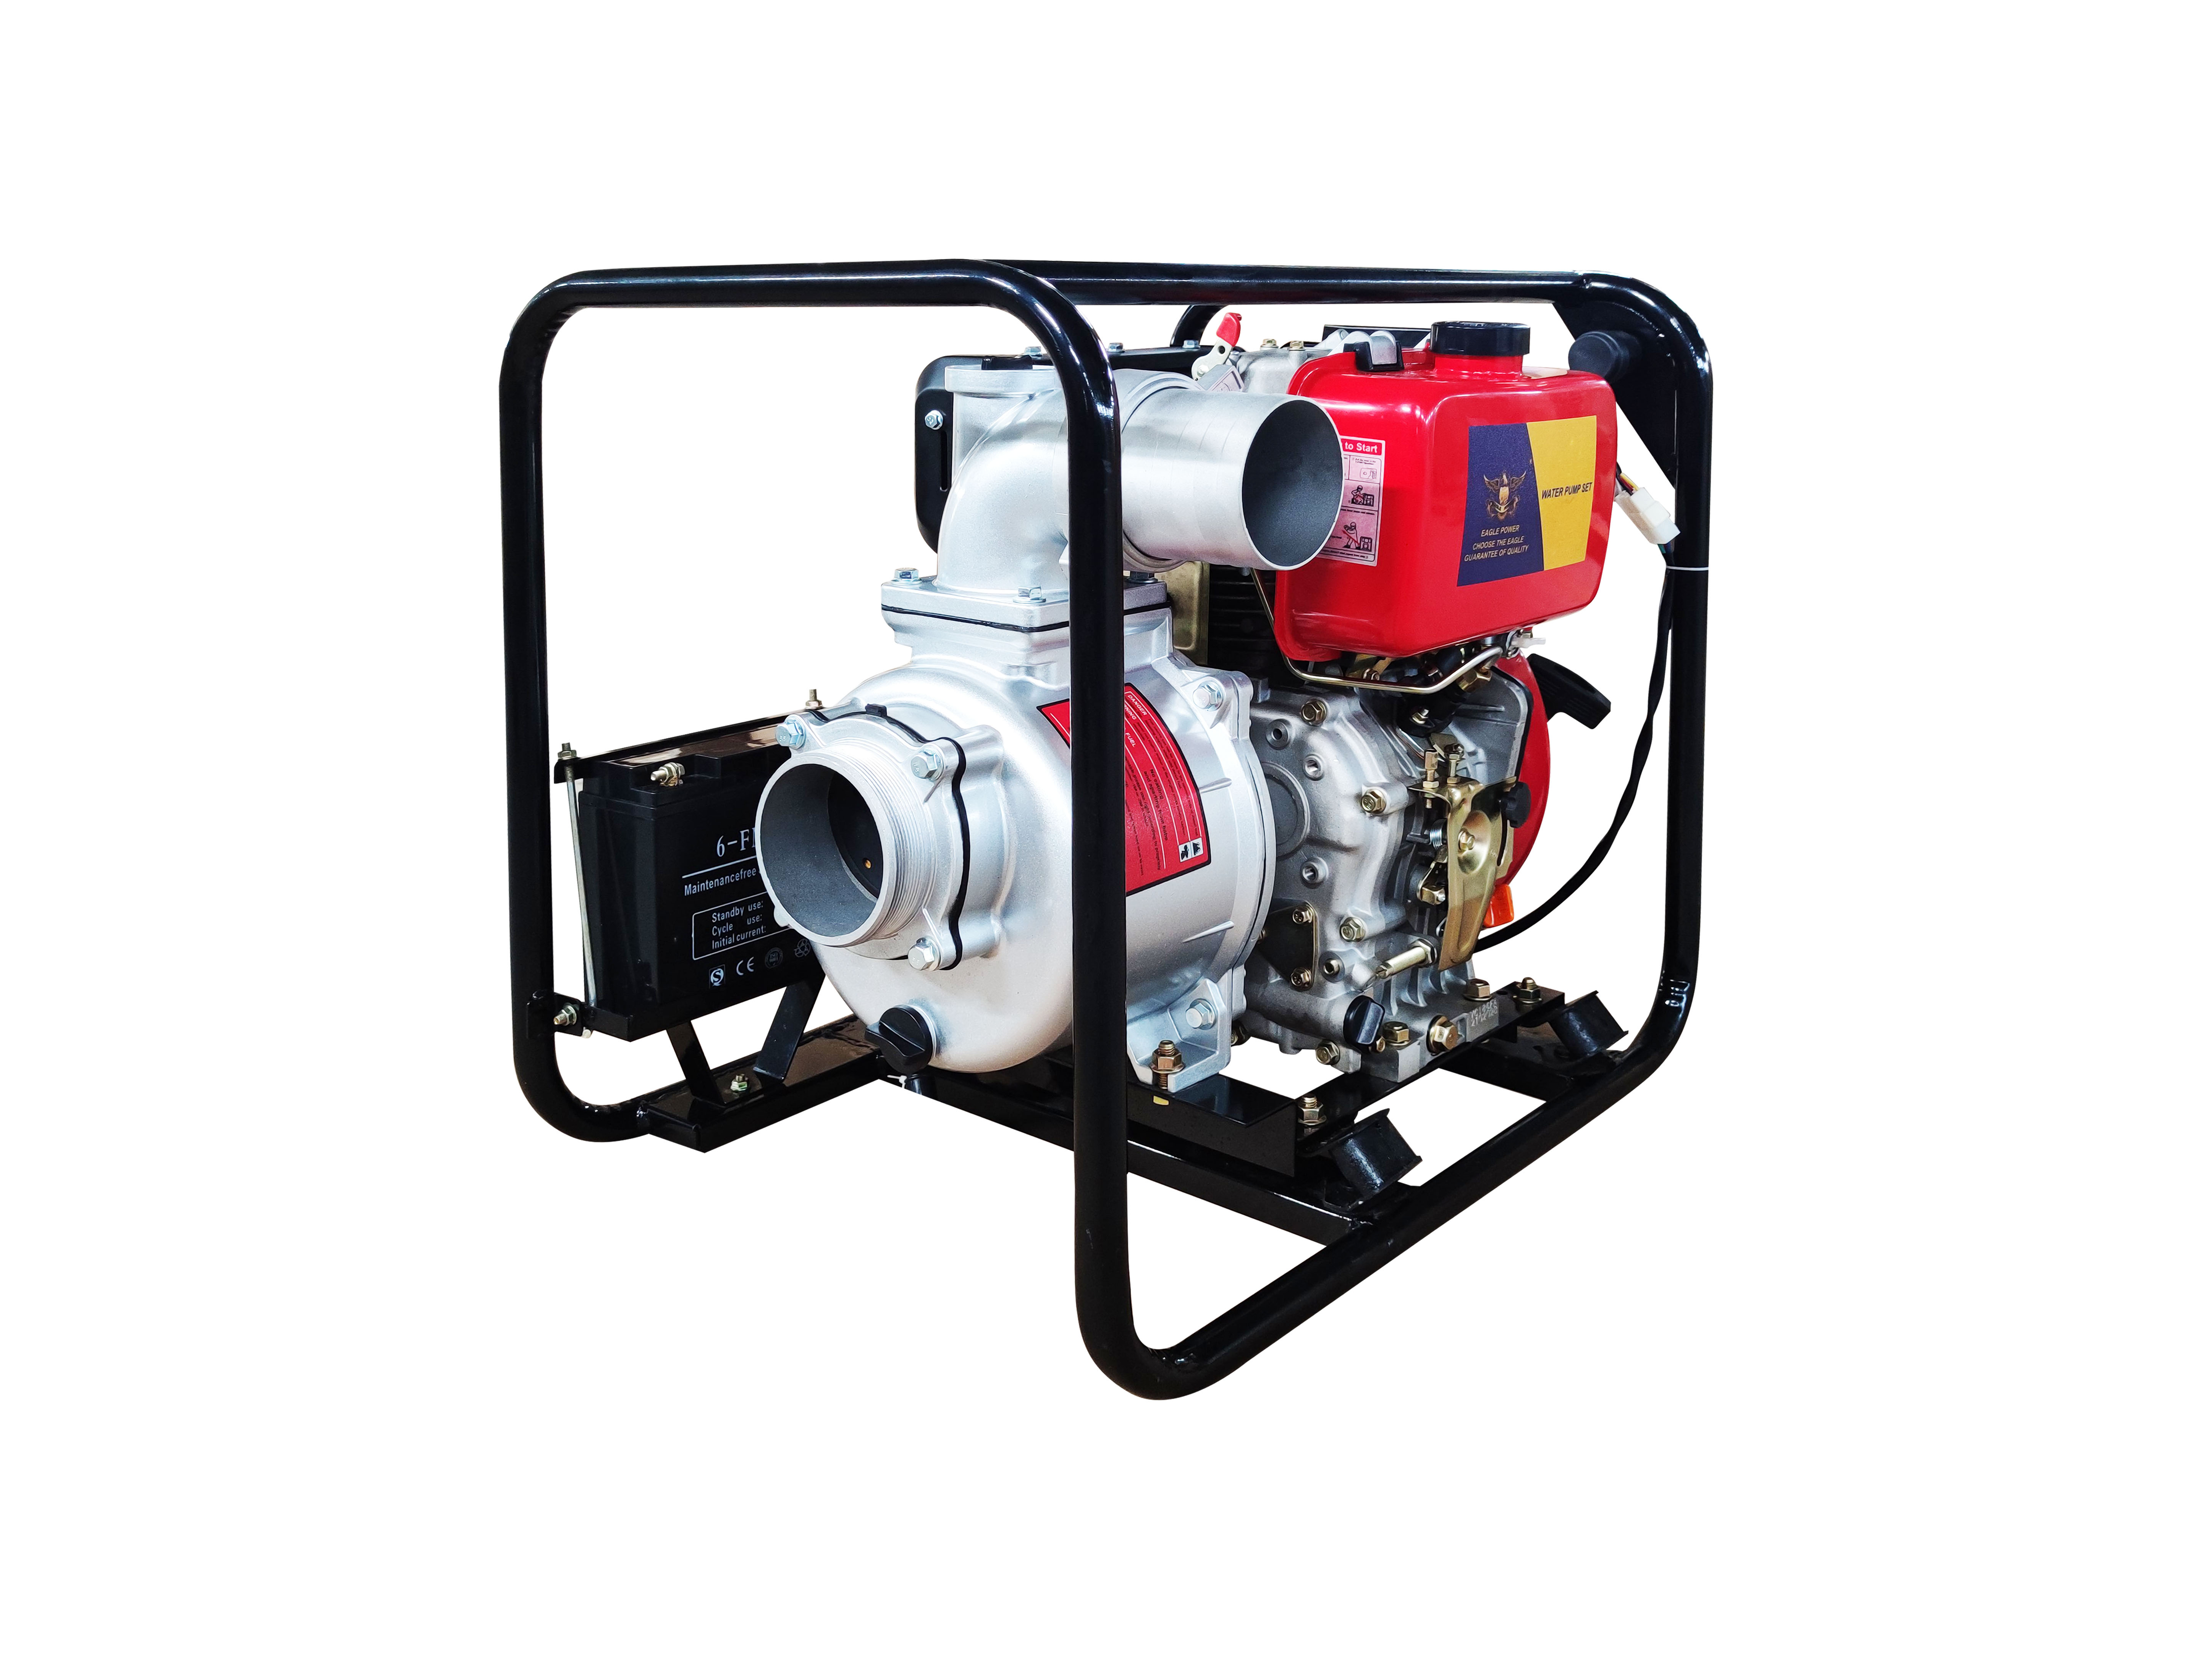 What size of water pump should be used for agricultural irrigation